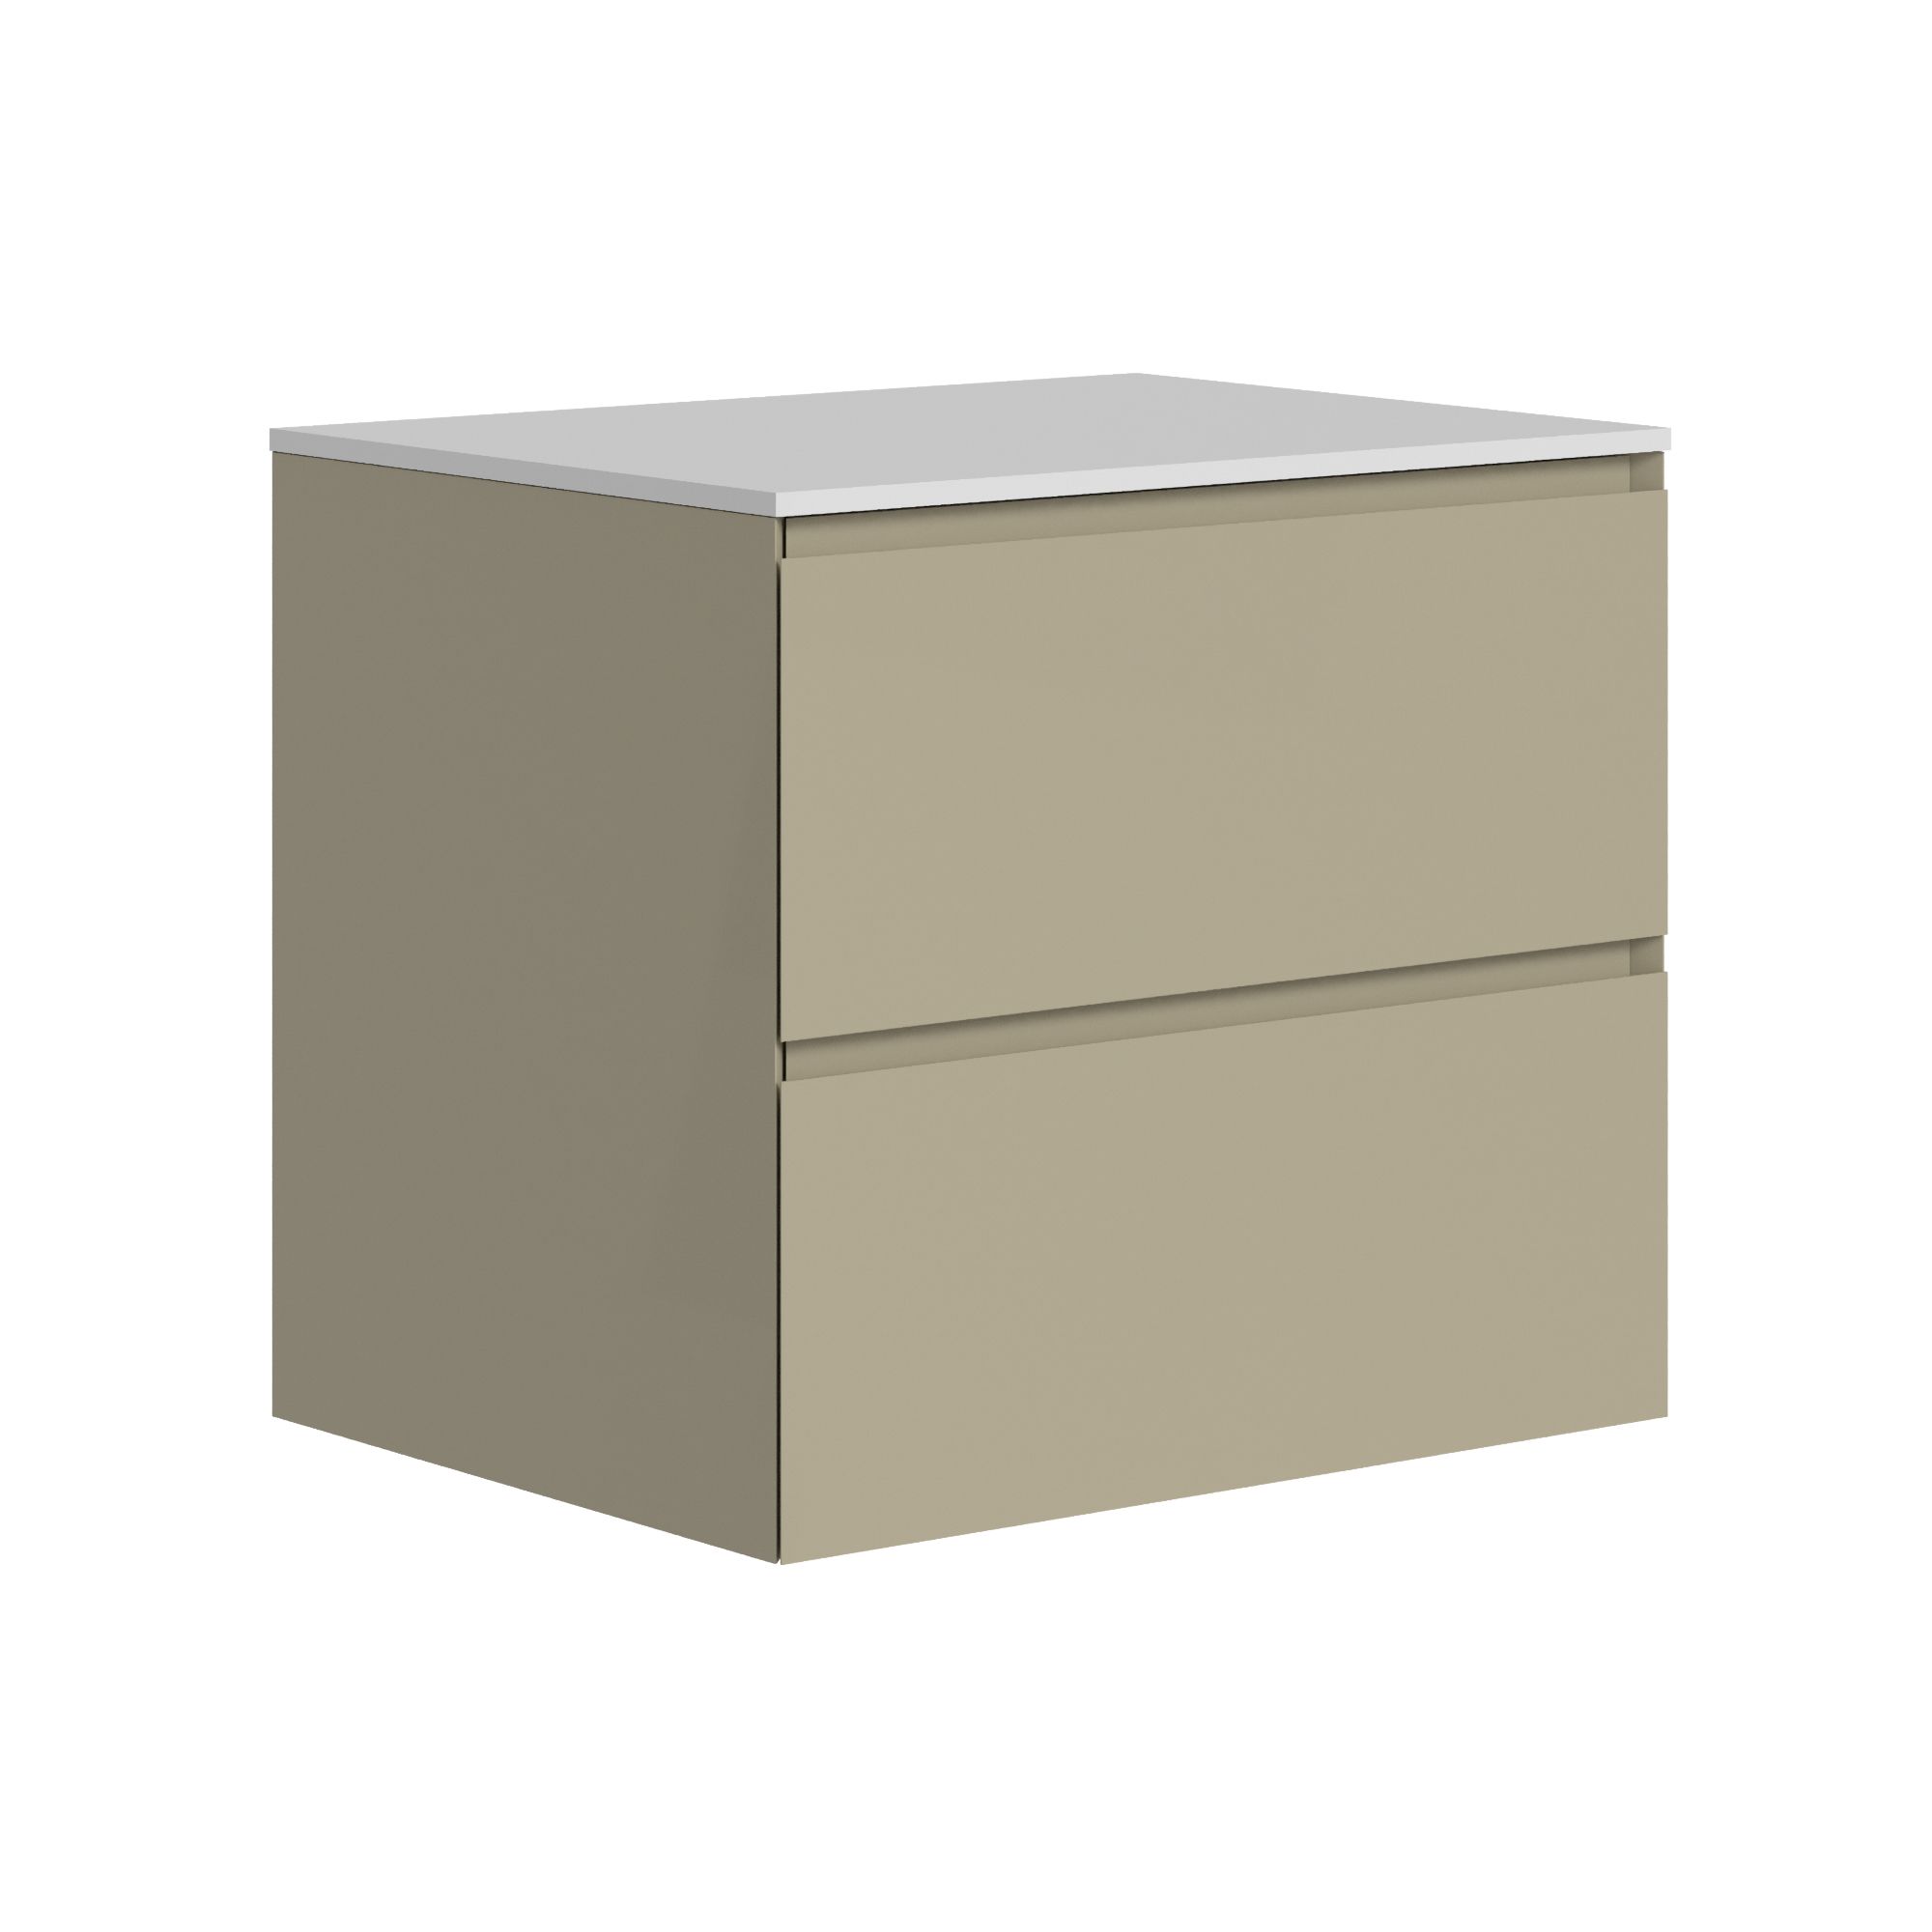 The Ellery Washbasin Pull Open Unit 800x520mm with Solid Surface Countertop